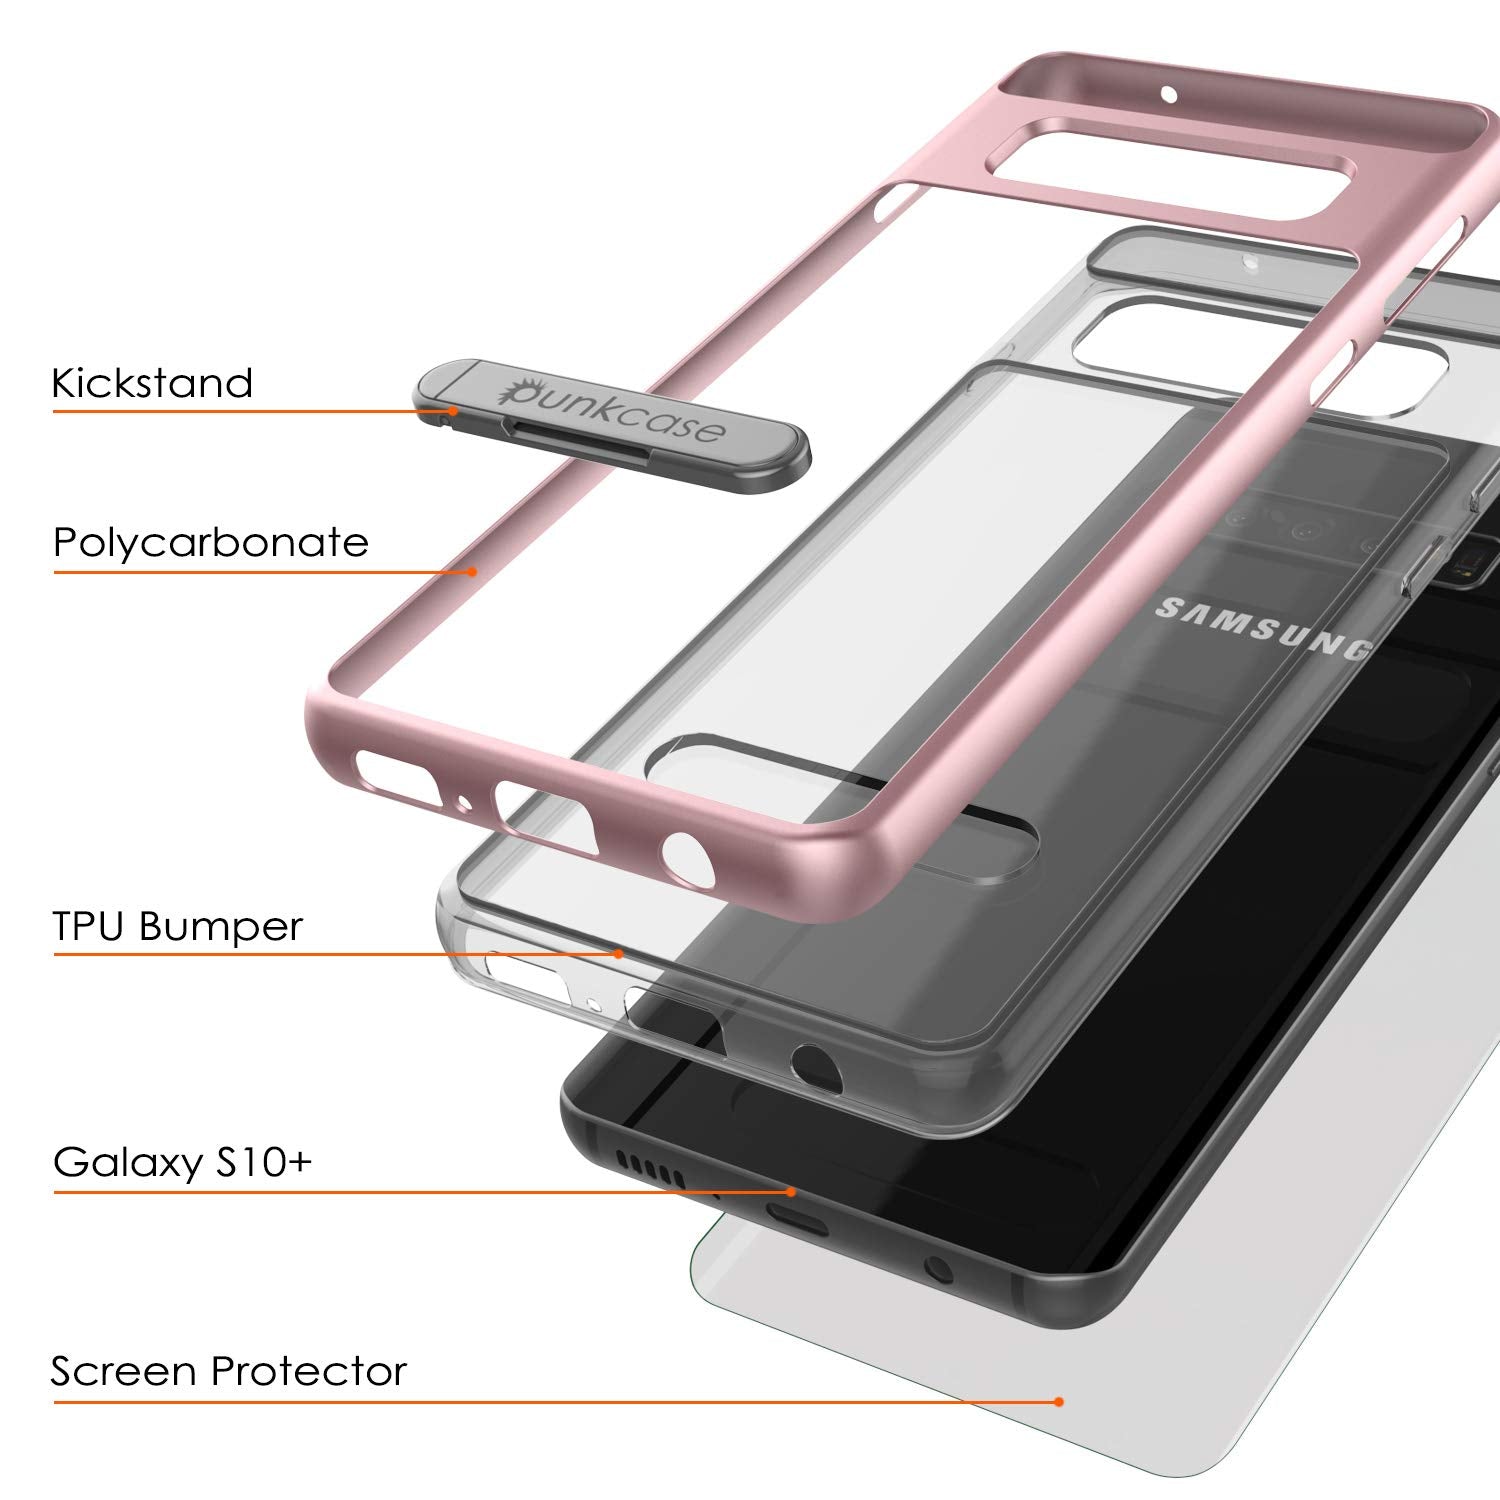 Galaxy S10+ Plus Case, PUNKcase [LUCID 3.0 Series] [Slim Fit] Armor Cover w/ Integrated Screen Protector [Rose Gold]